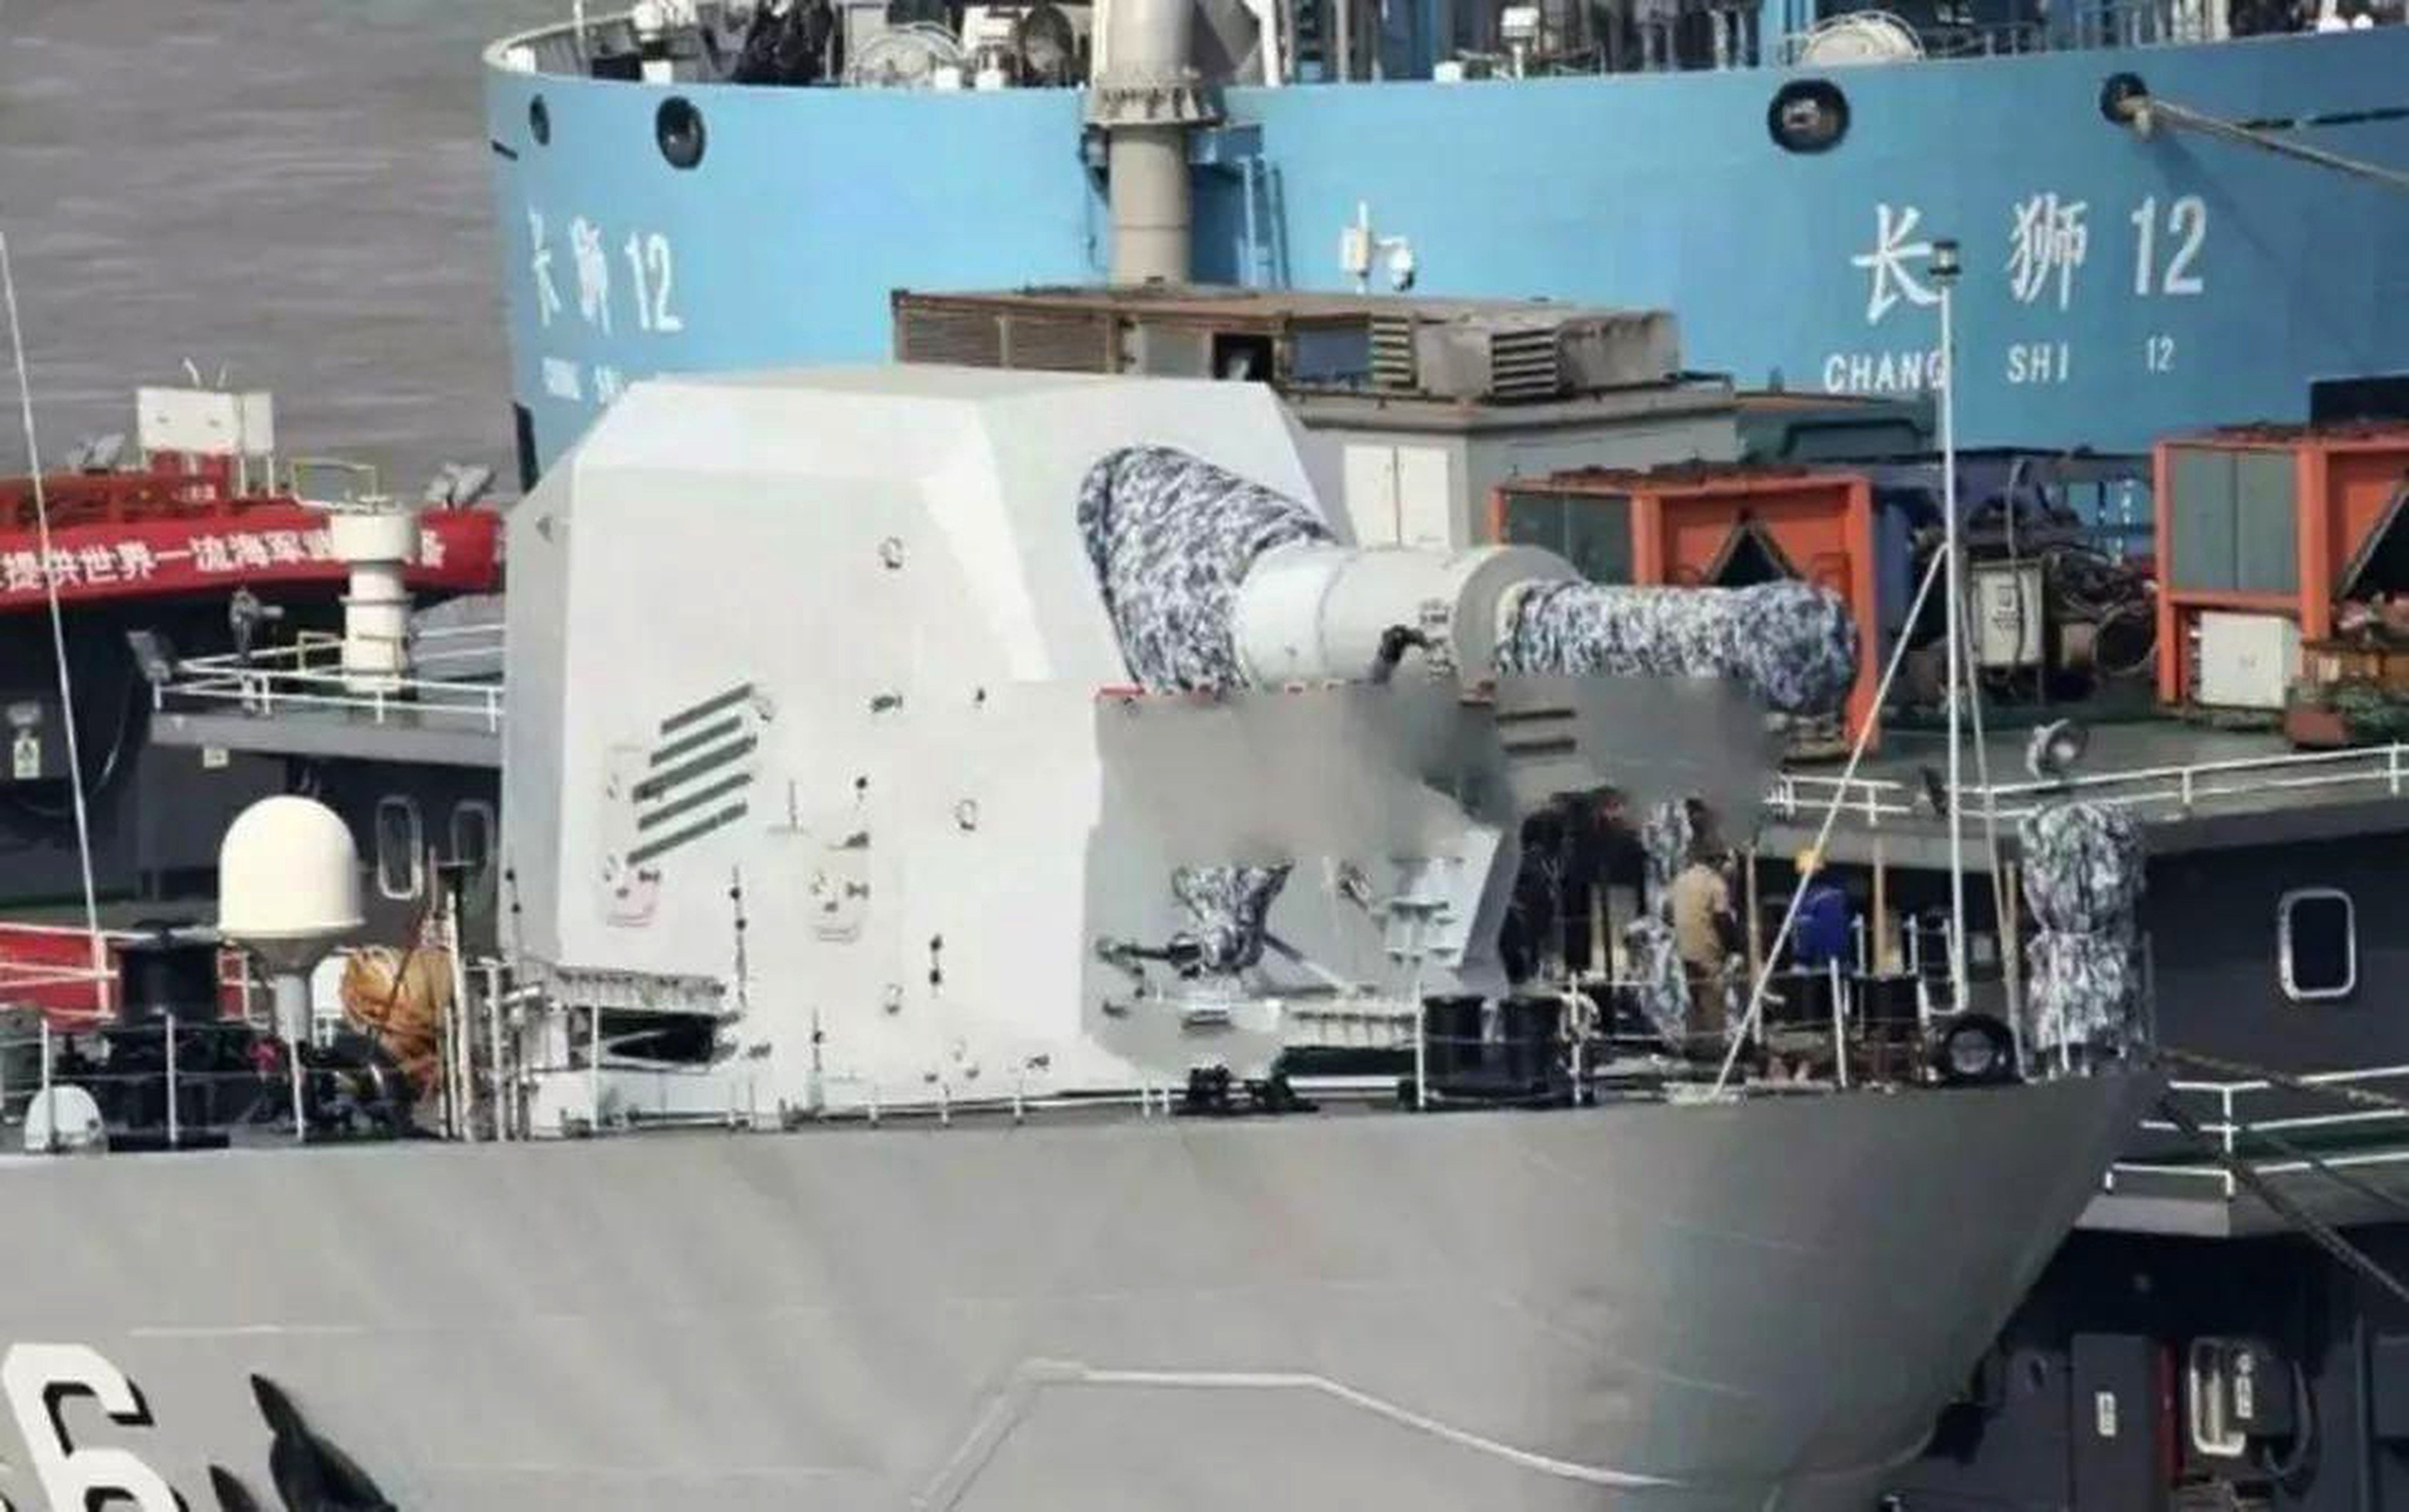 The Type 072 destroyer (pictured) was spotted in 2018, carrying what military experts believed to be the PLA Navy’s first electromagnetic rail gun. Photo: Handout